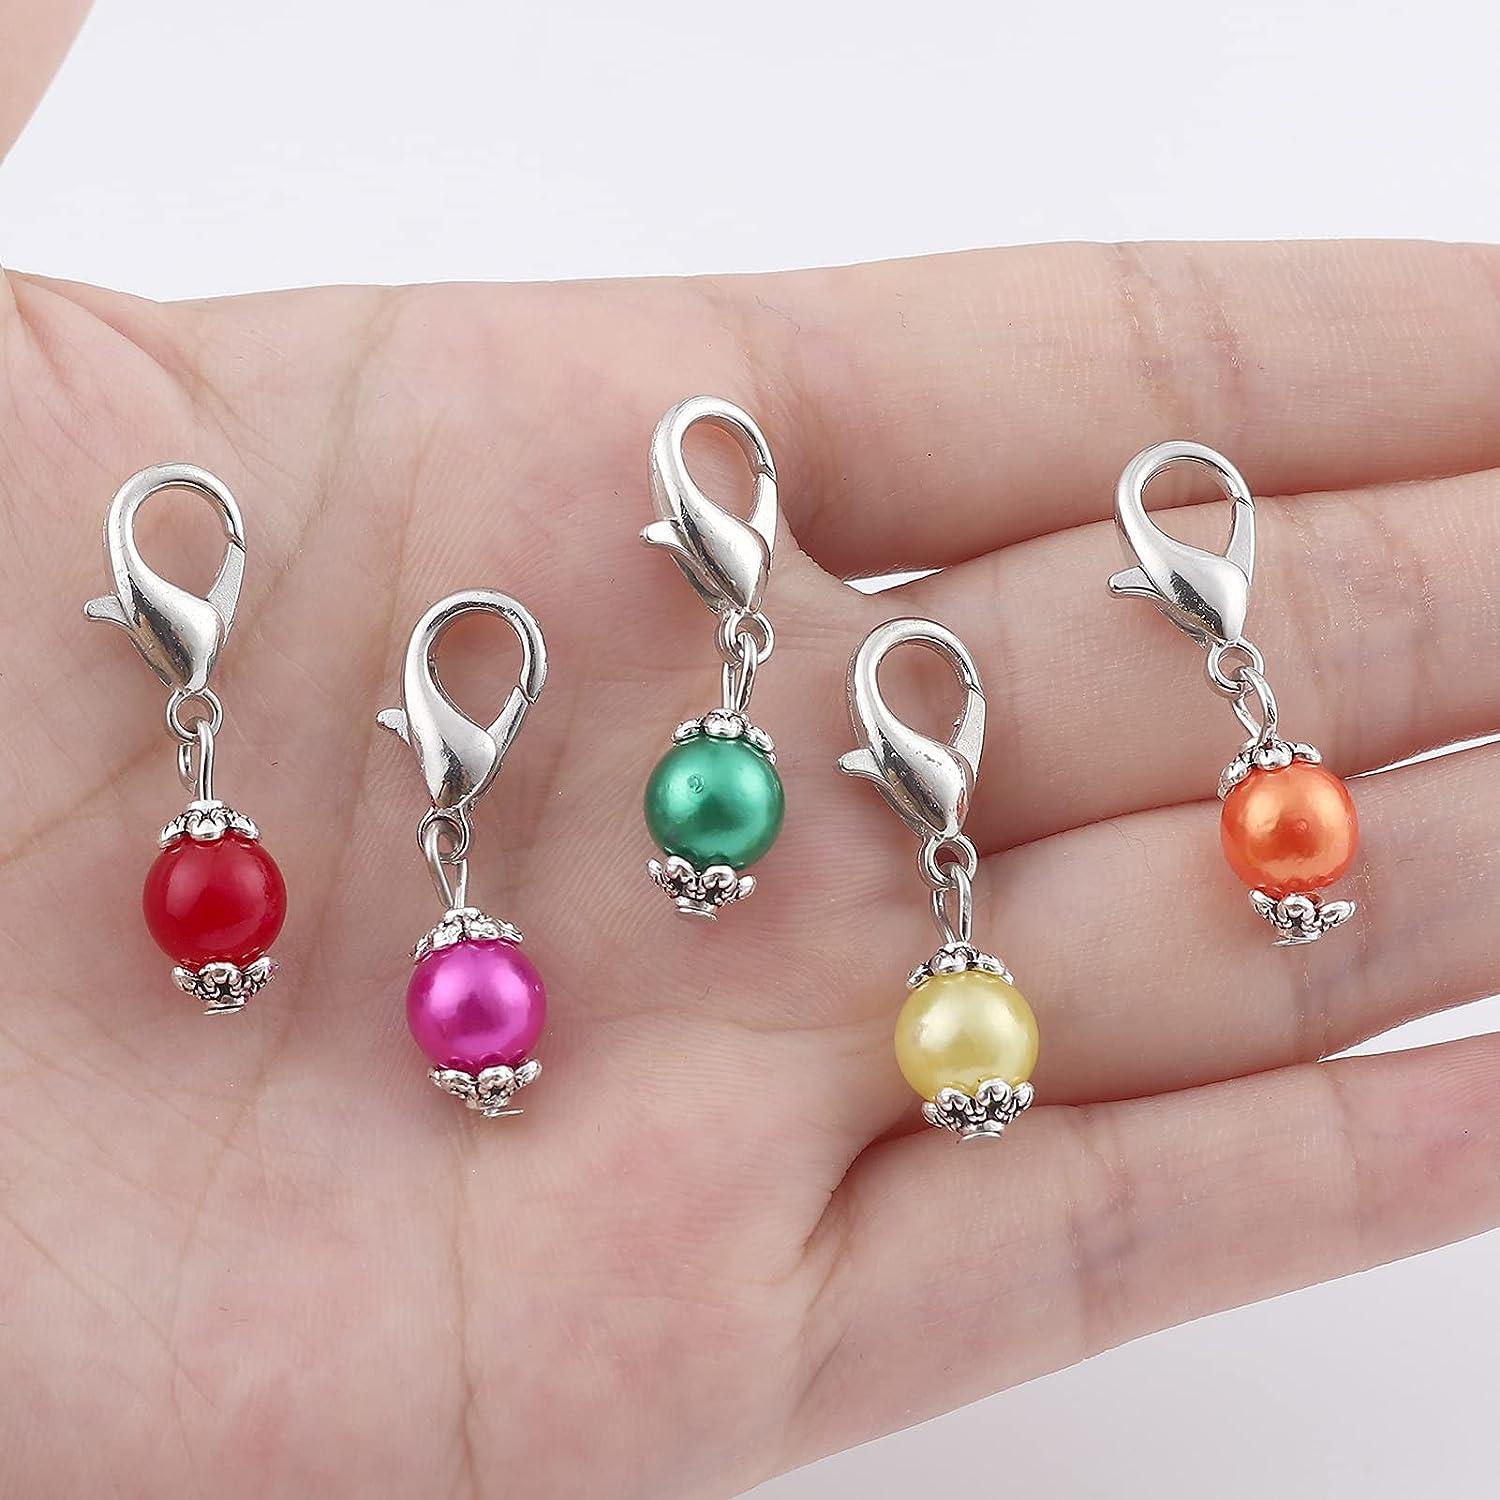  12Pcs Stitch Marker Charms for Knitting-Crochet Locking Stitch  Marker Clip on Charms for Crocheting Weaving Sewing Jewelry Making DIY  Craft(Colors Randomly Shipped)